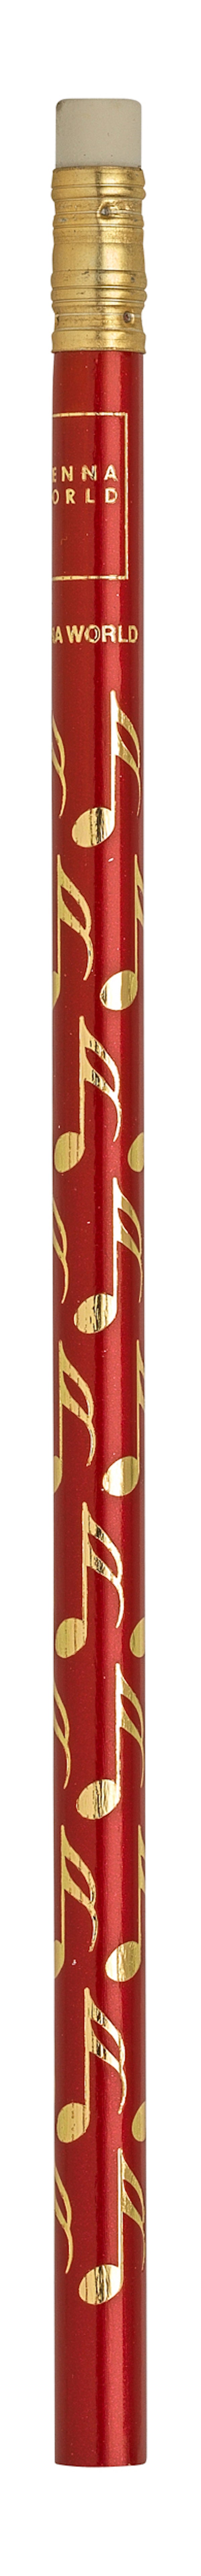 Pencil Red with Gold Notes